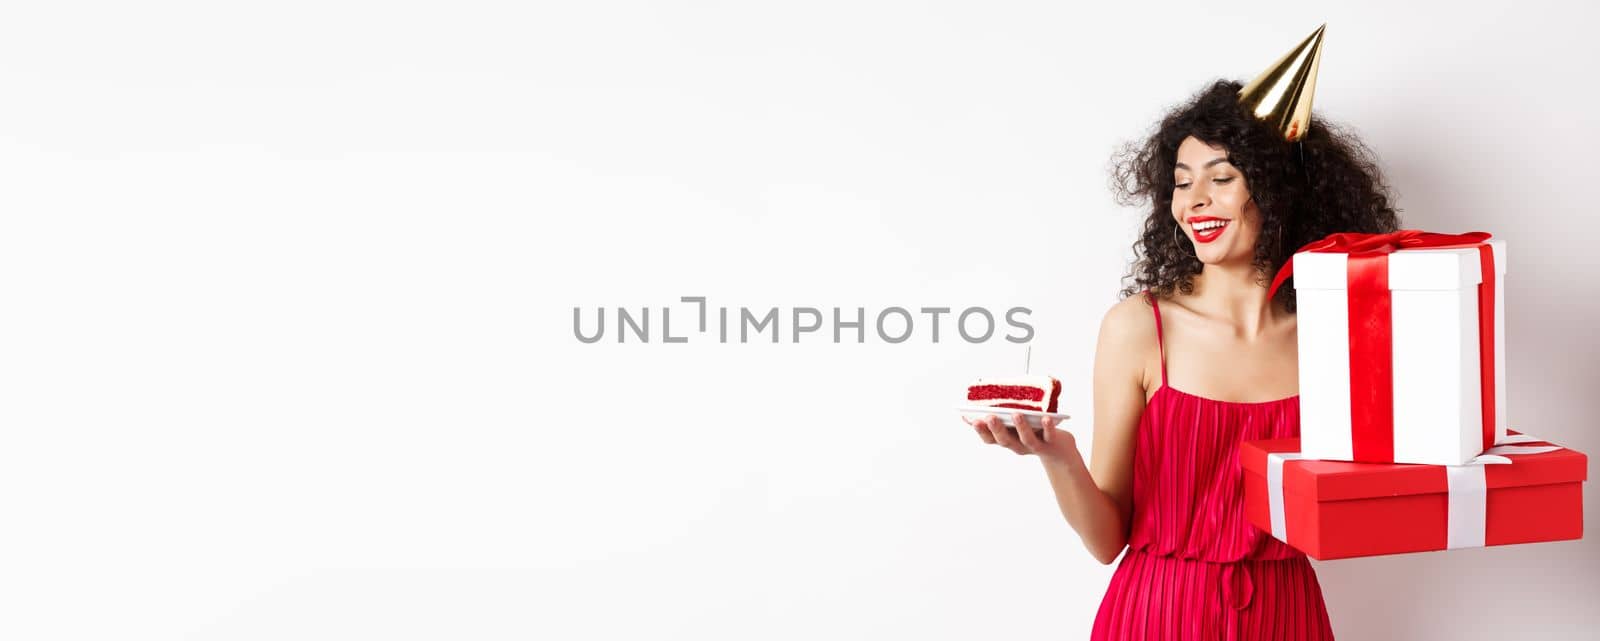 Cheerful smiling woman in red dress and party cone, looking happy at birthday cake, holding gifts, standing on white background. Copy space